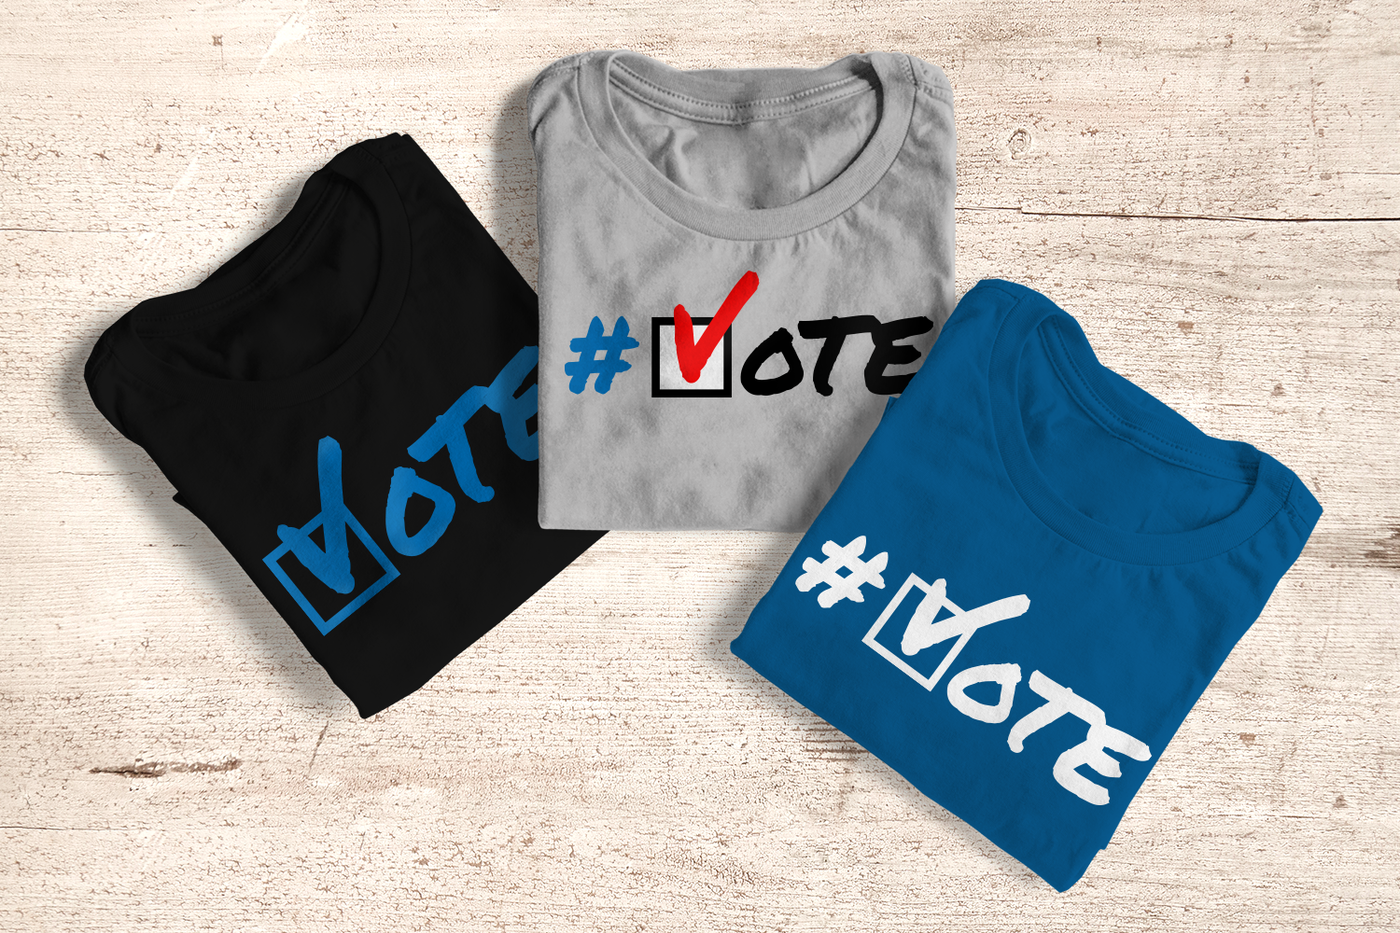 Three folded shirts. Each has the word VOTE with the V looking like a checkmark and a box behind it.